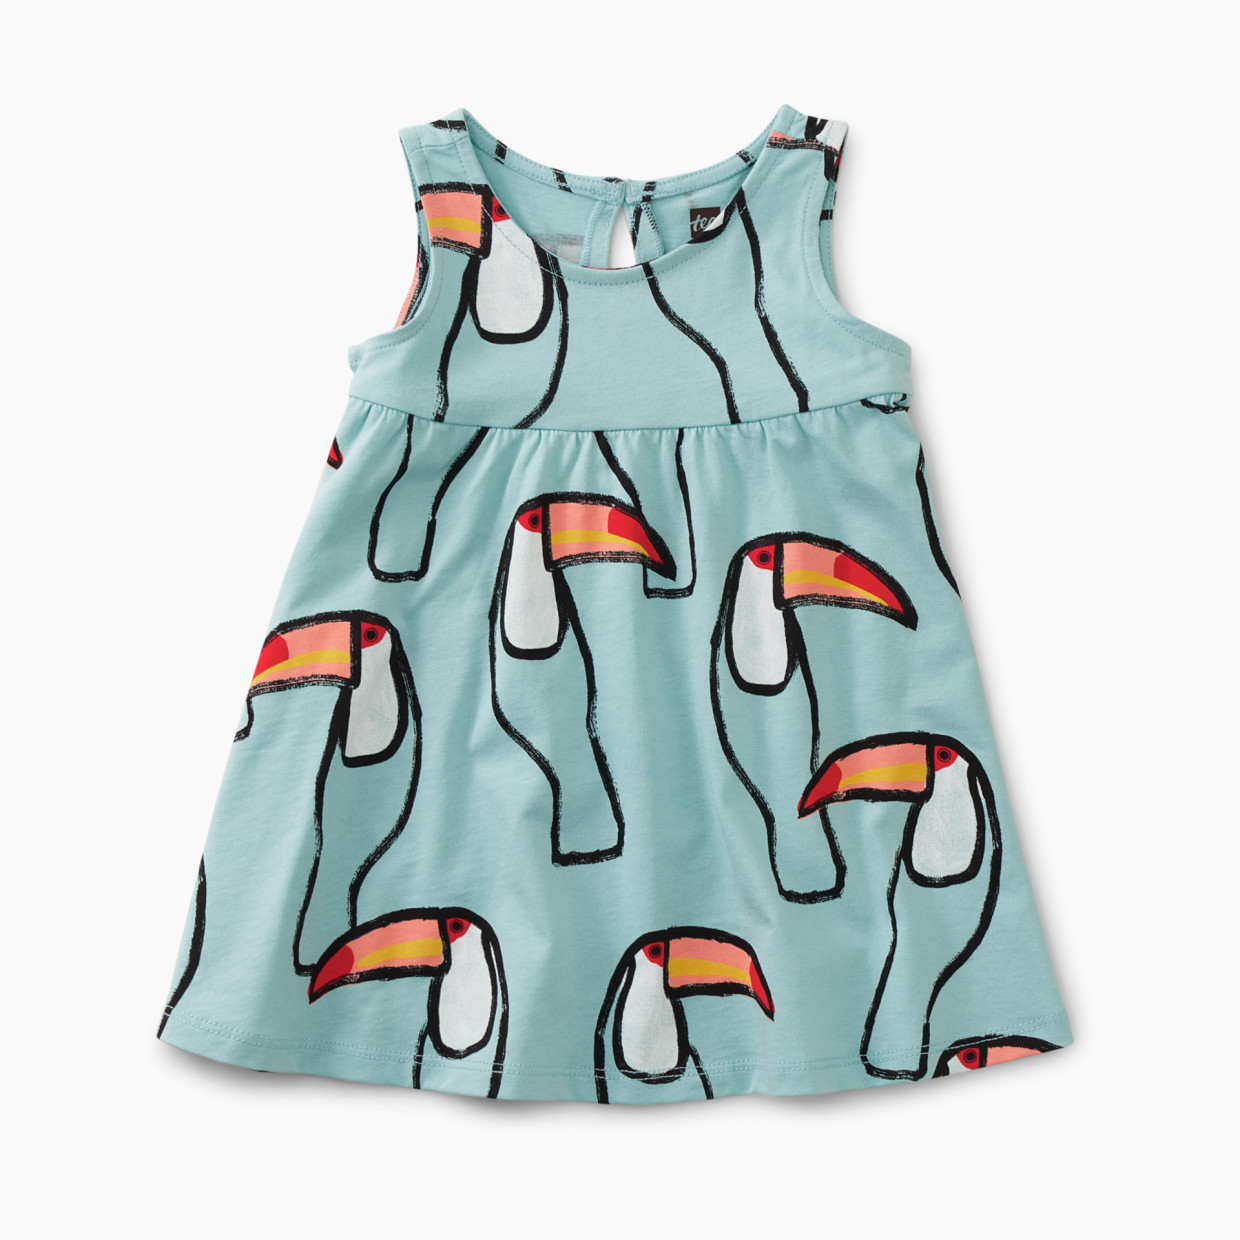 Tea Collection Twirl Tank Baby Dress - Toucans In Mint, 3-6 Months.